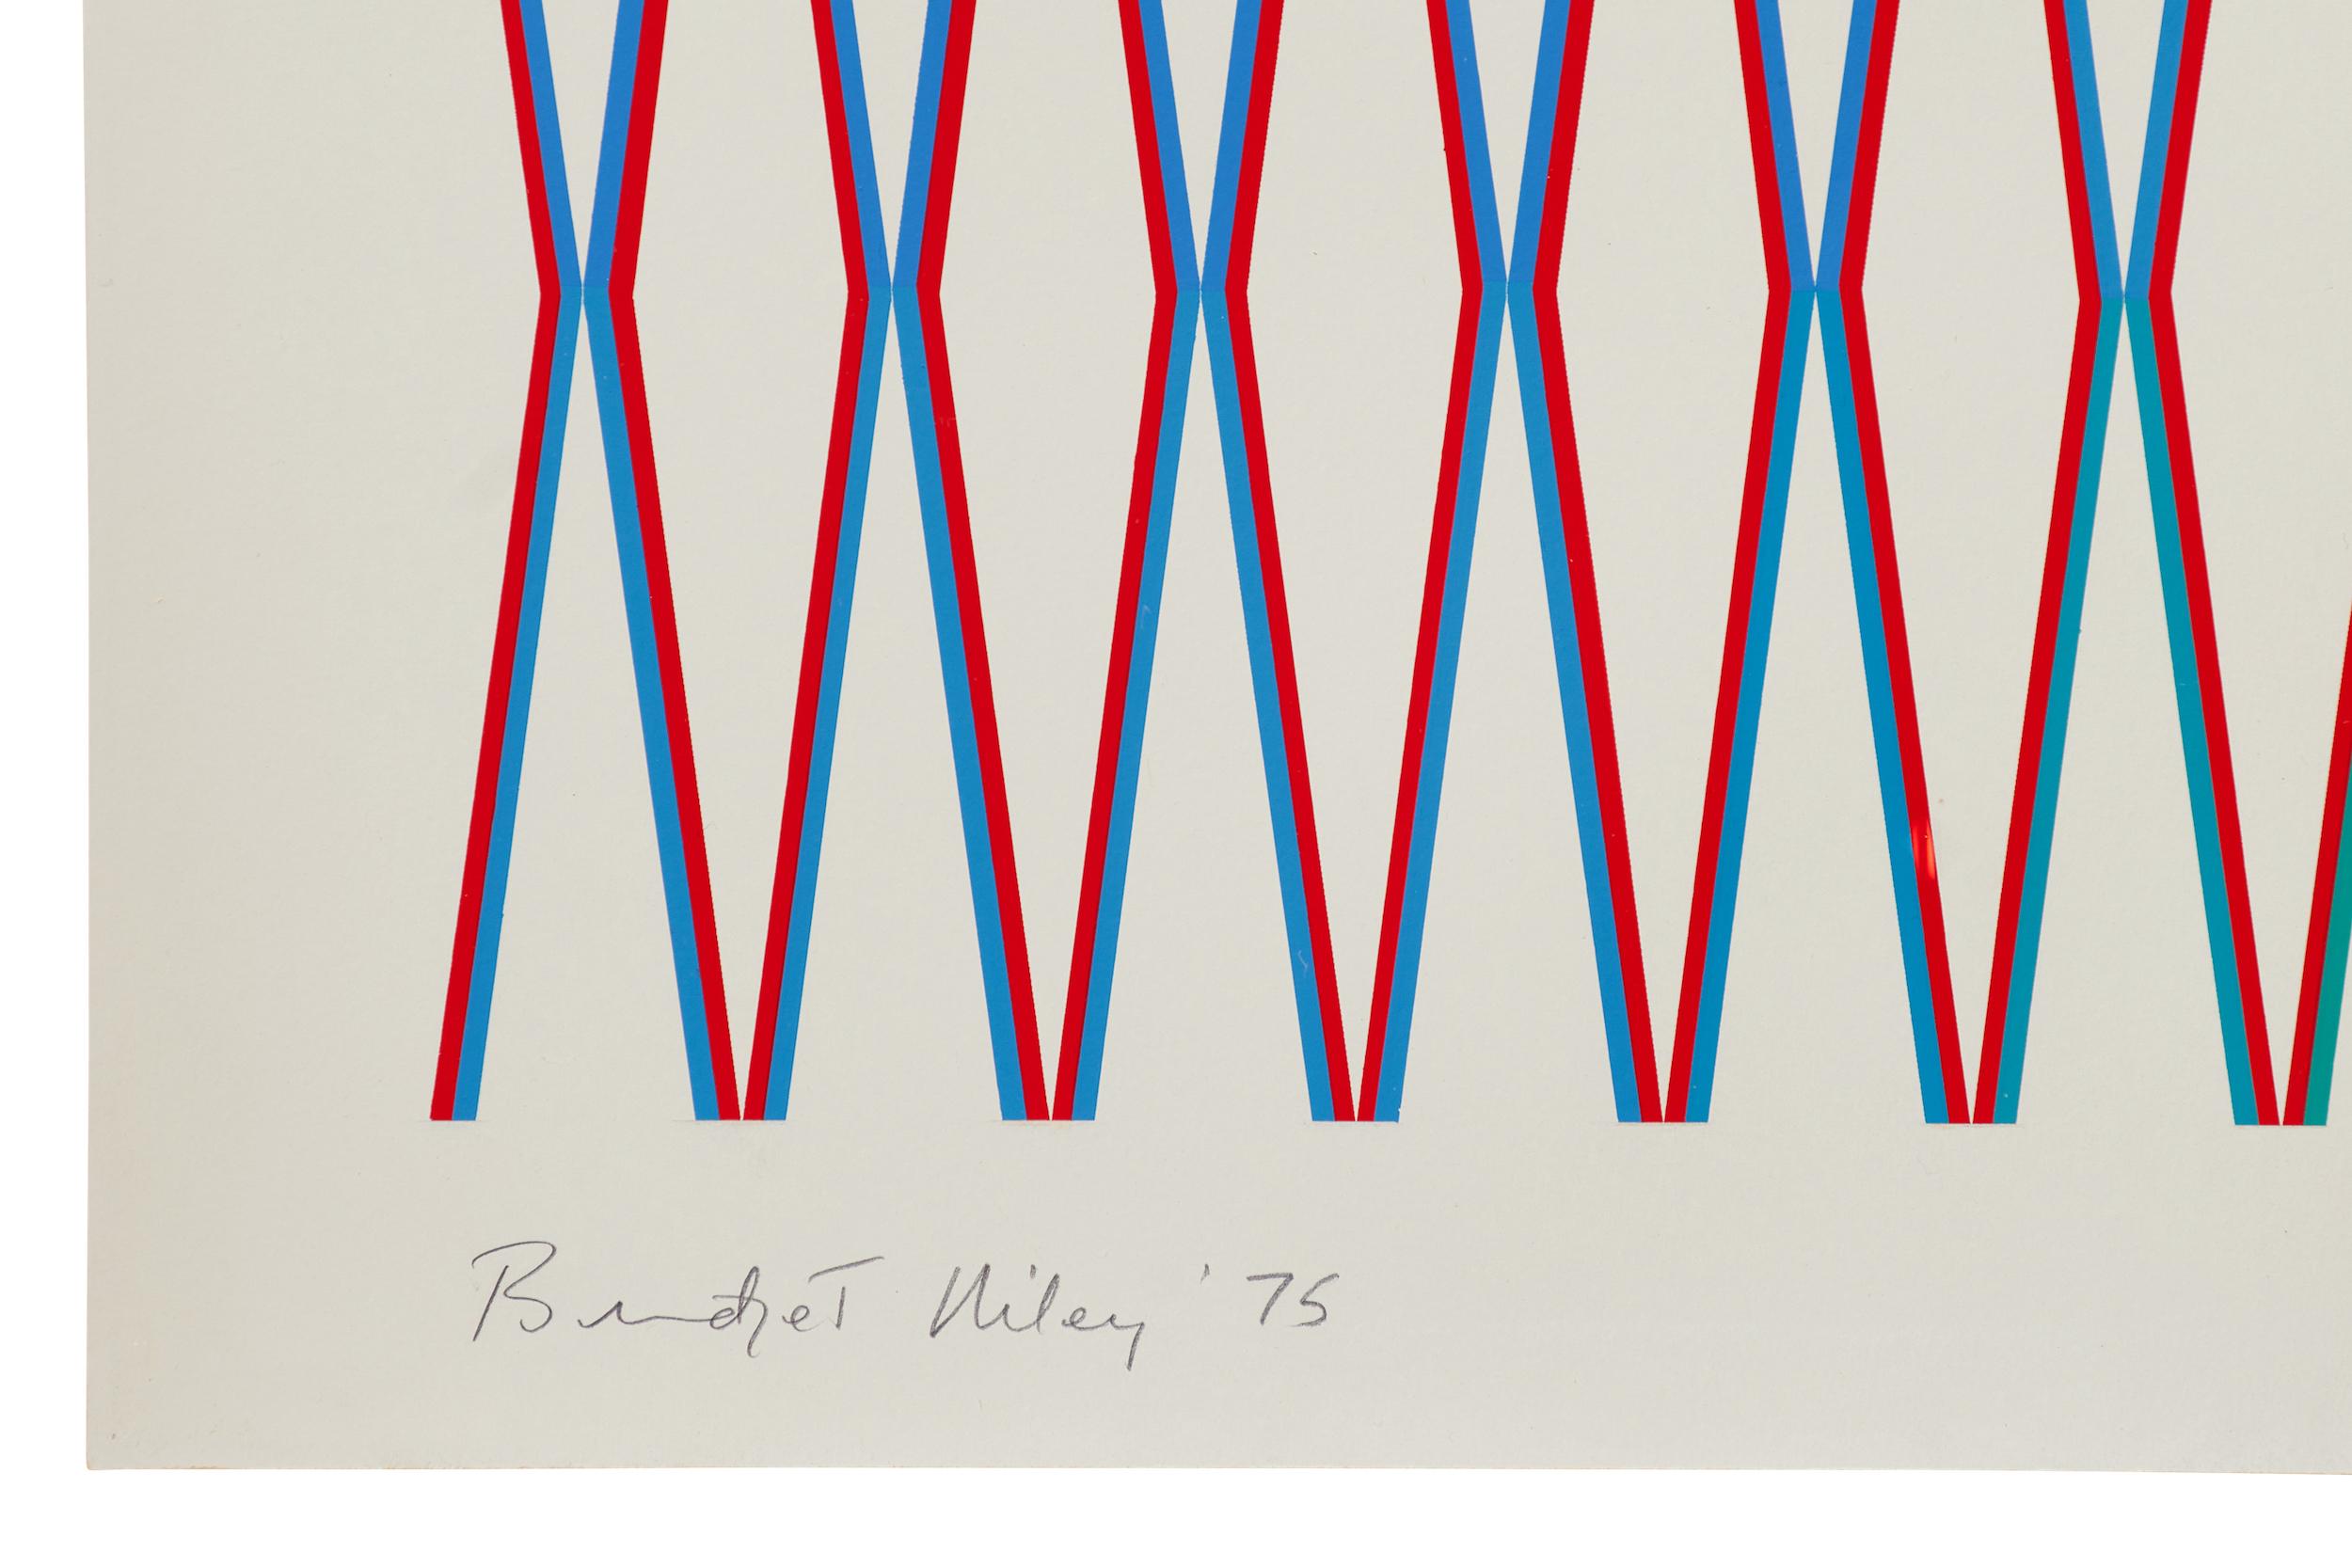 Splice, 1975
Bridget Riley

Screenprint in colours, on wove
Signed, dated, titled and, numbered from the edition of 45
Printed by Graham Henderson, London
Sheet: 75.3 × 54 cm (29.6 × 21.2 in)
Literature: Schubert 21; The Bridget Riley Art Foundation